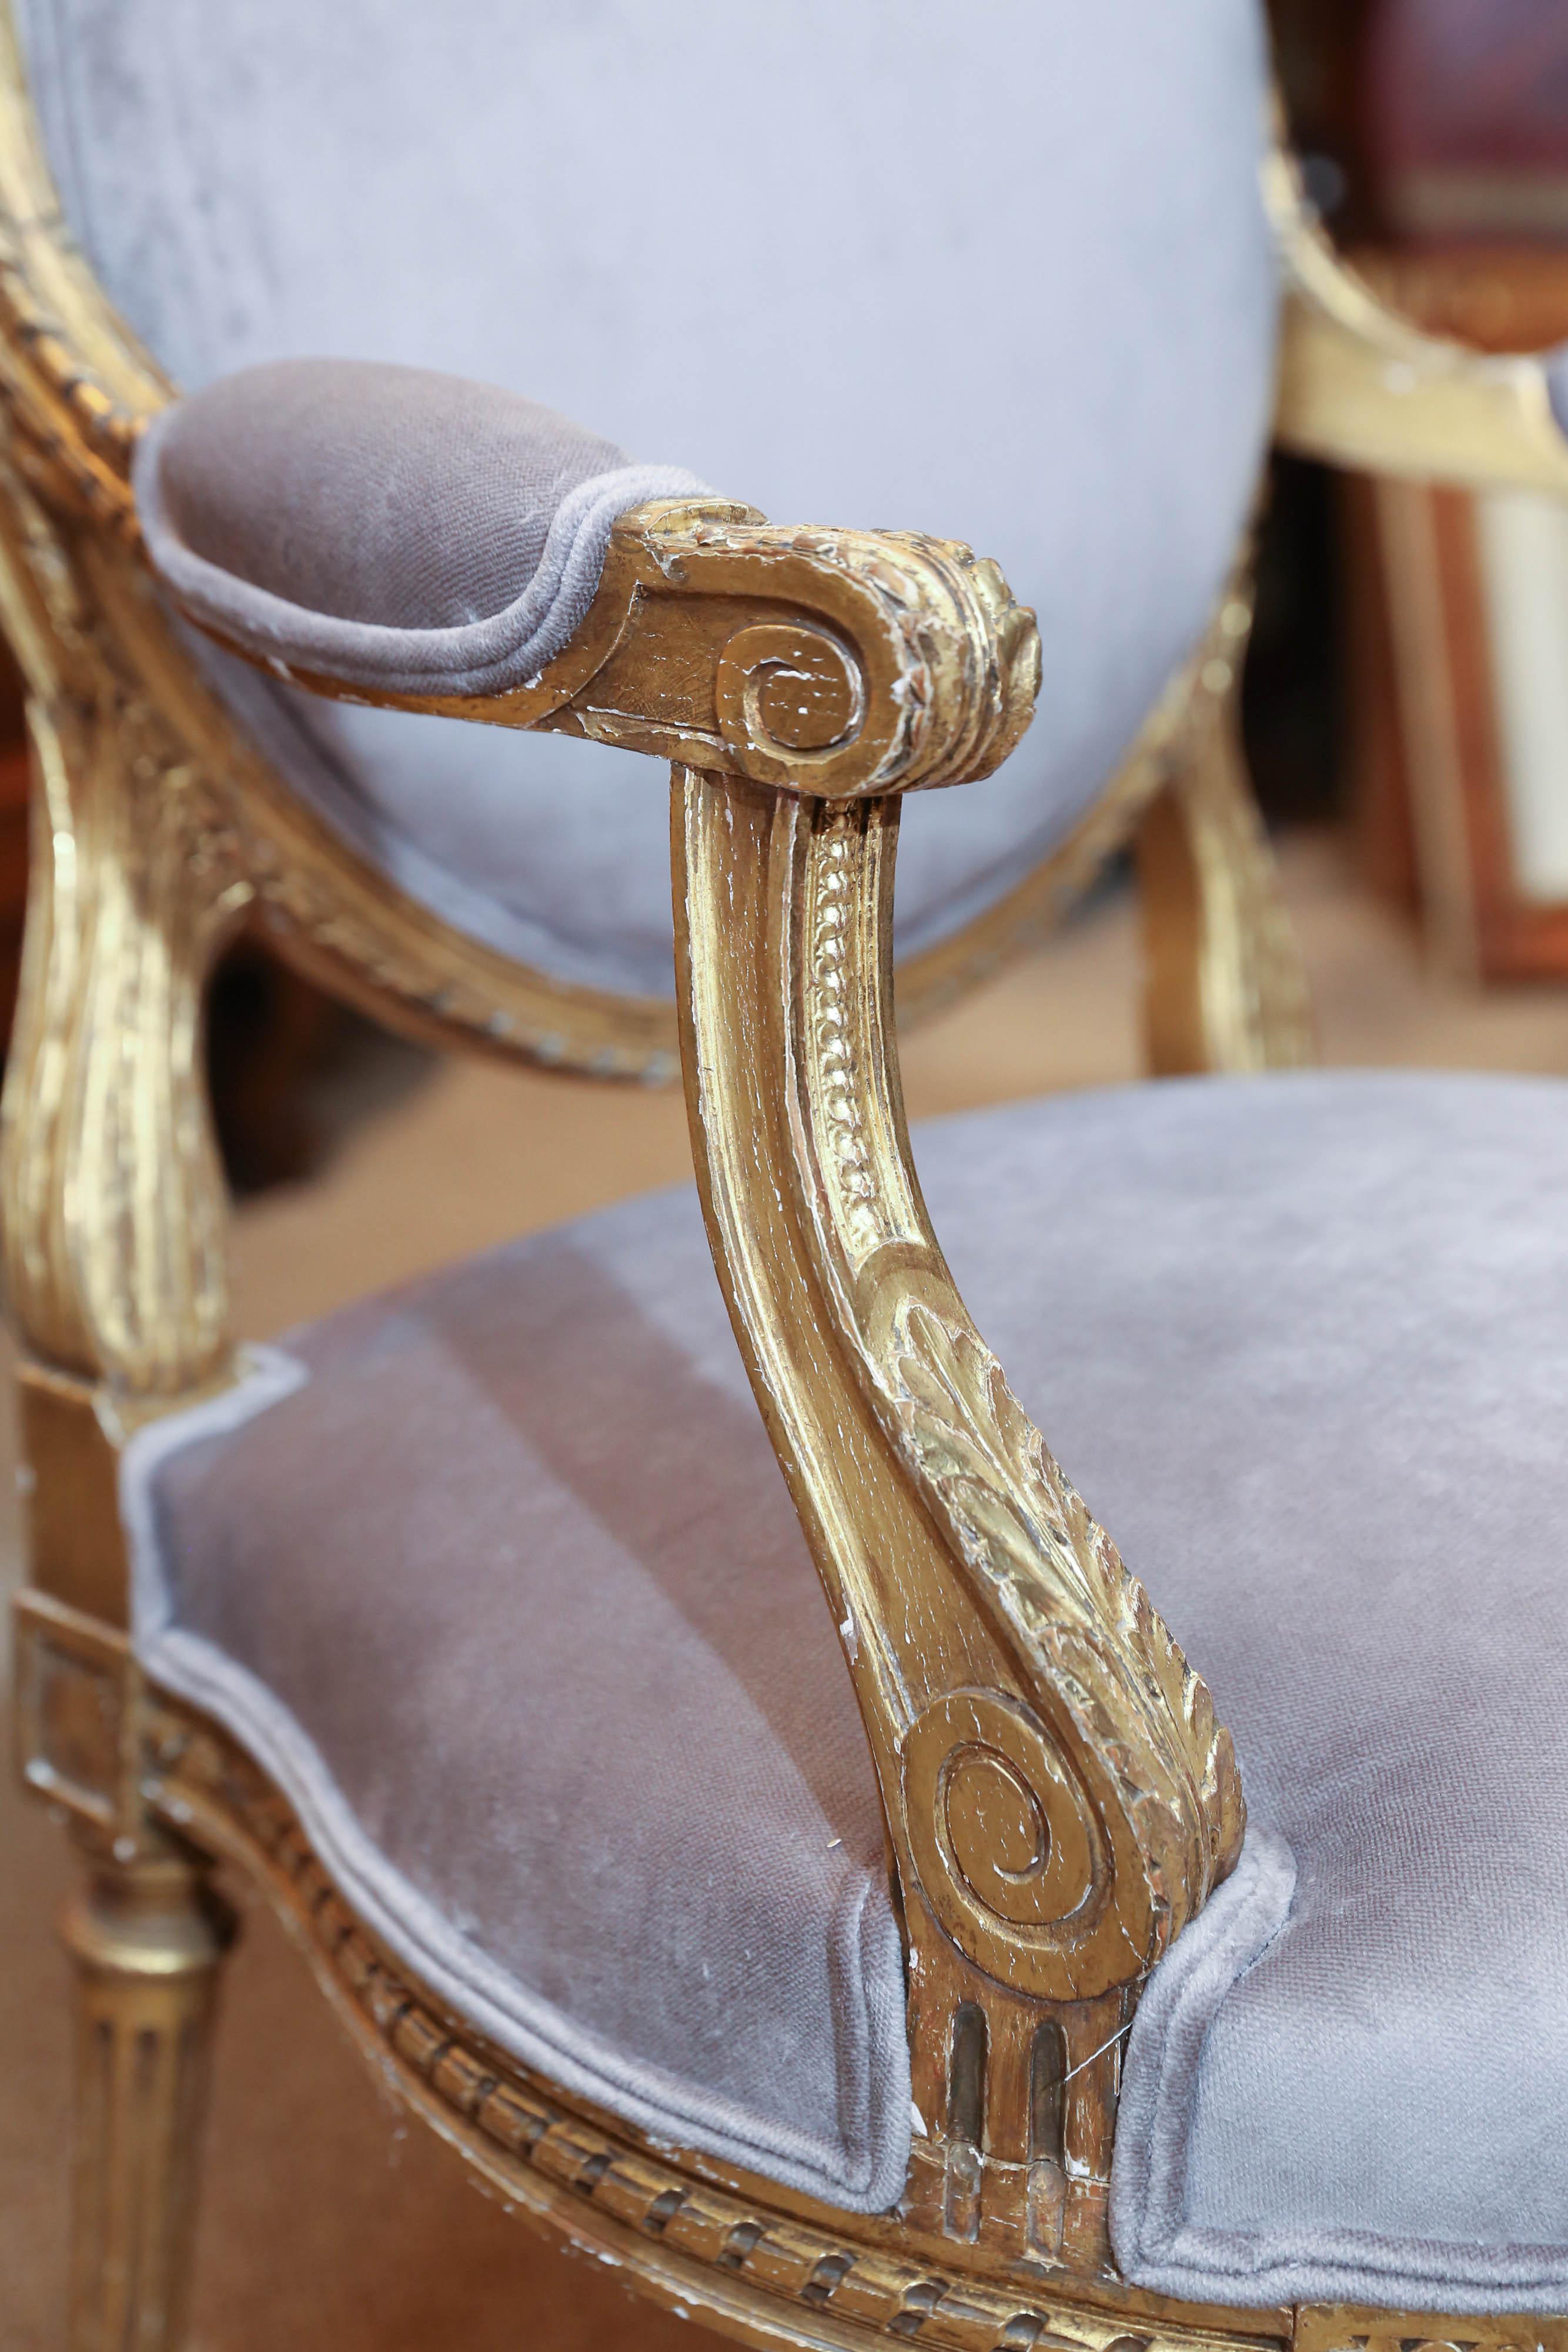 European Pair of French Louis XVI Style Giltwood Fauteuils, Early 19th Century